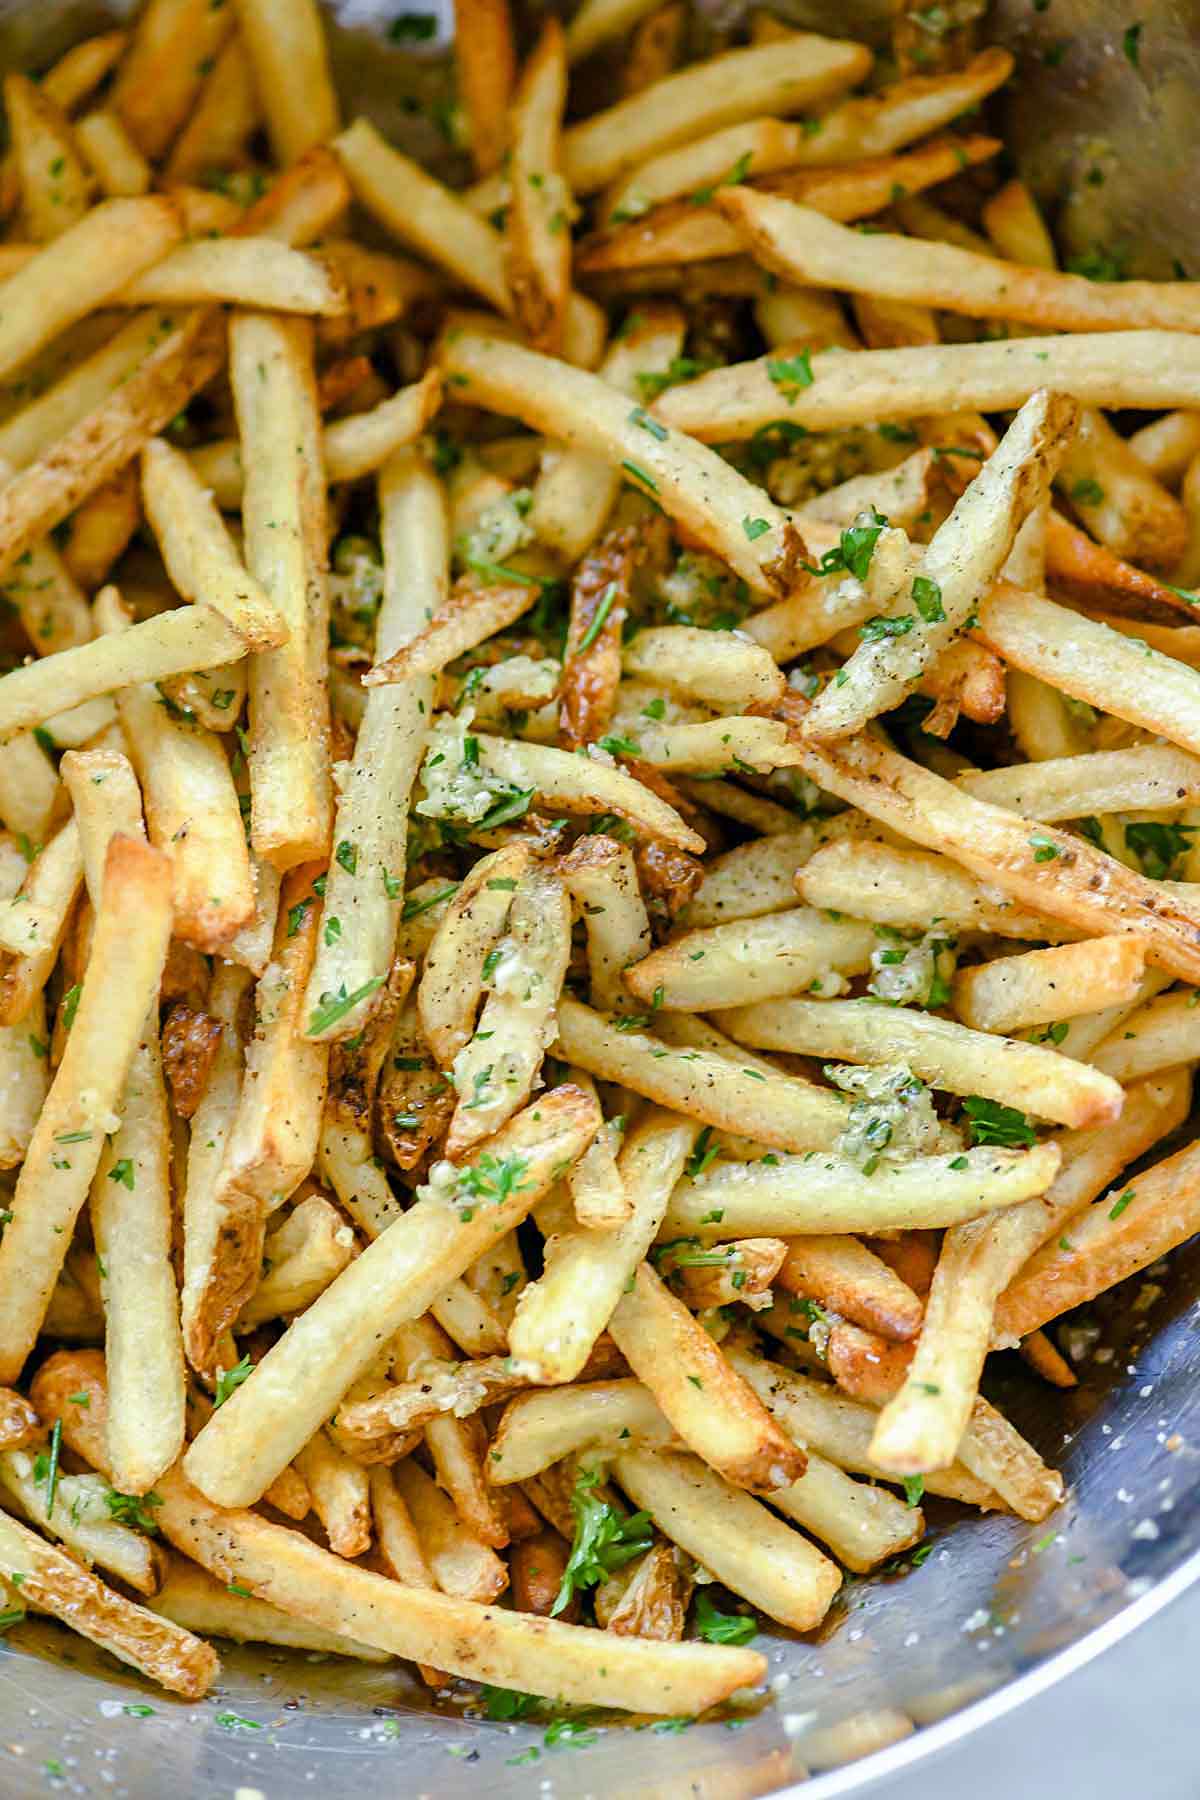 How to make homemade french fries in the oven